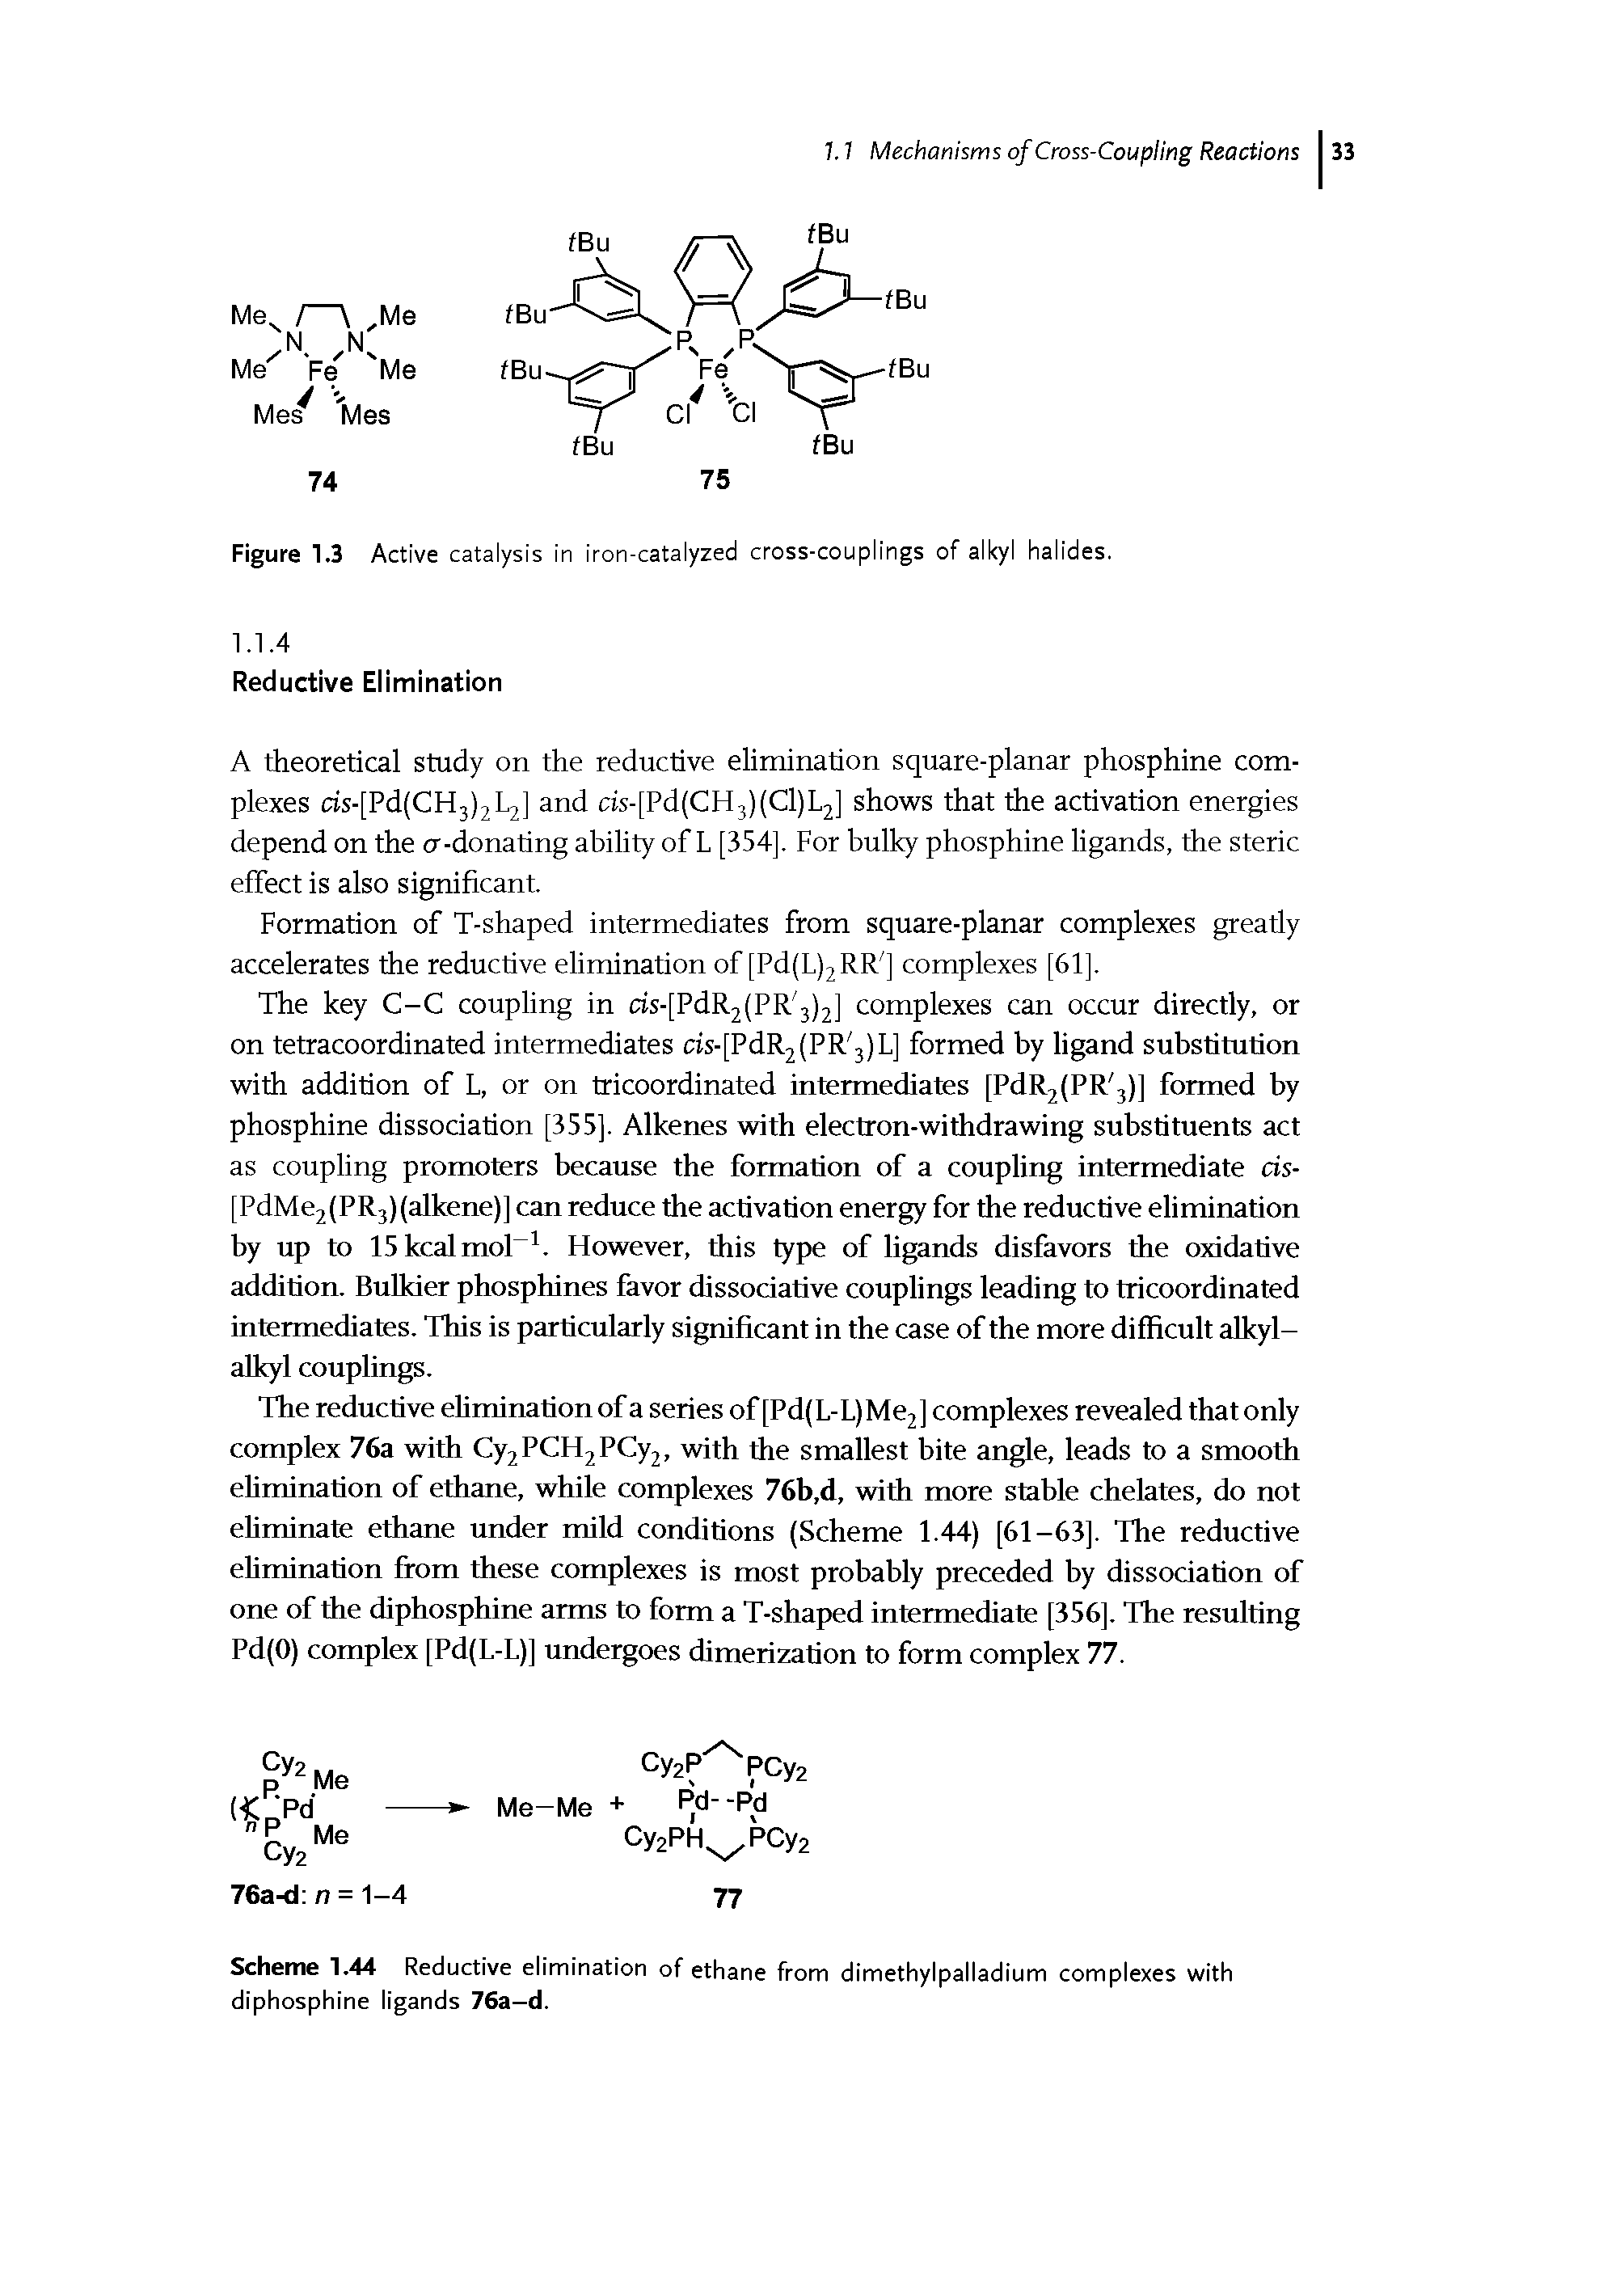 Scheme 1.44 Reductive elimination of ethane from dimethylpalladium complexes with diphosphine ligands 76a-d.